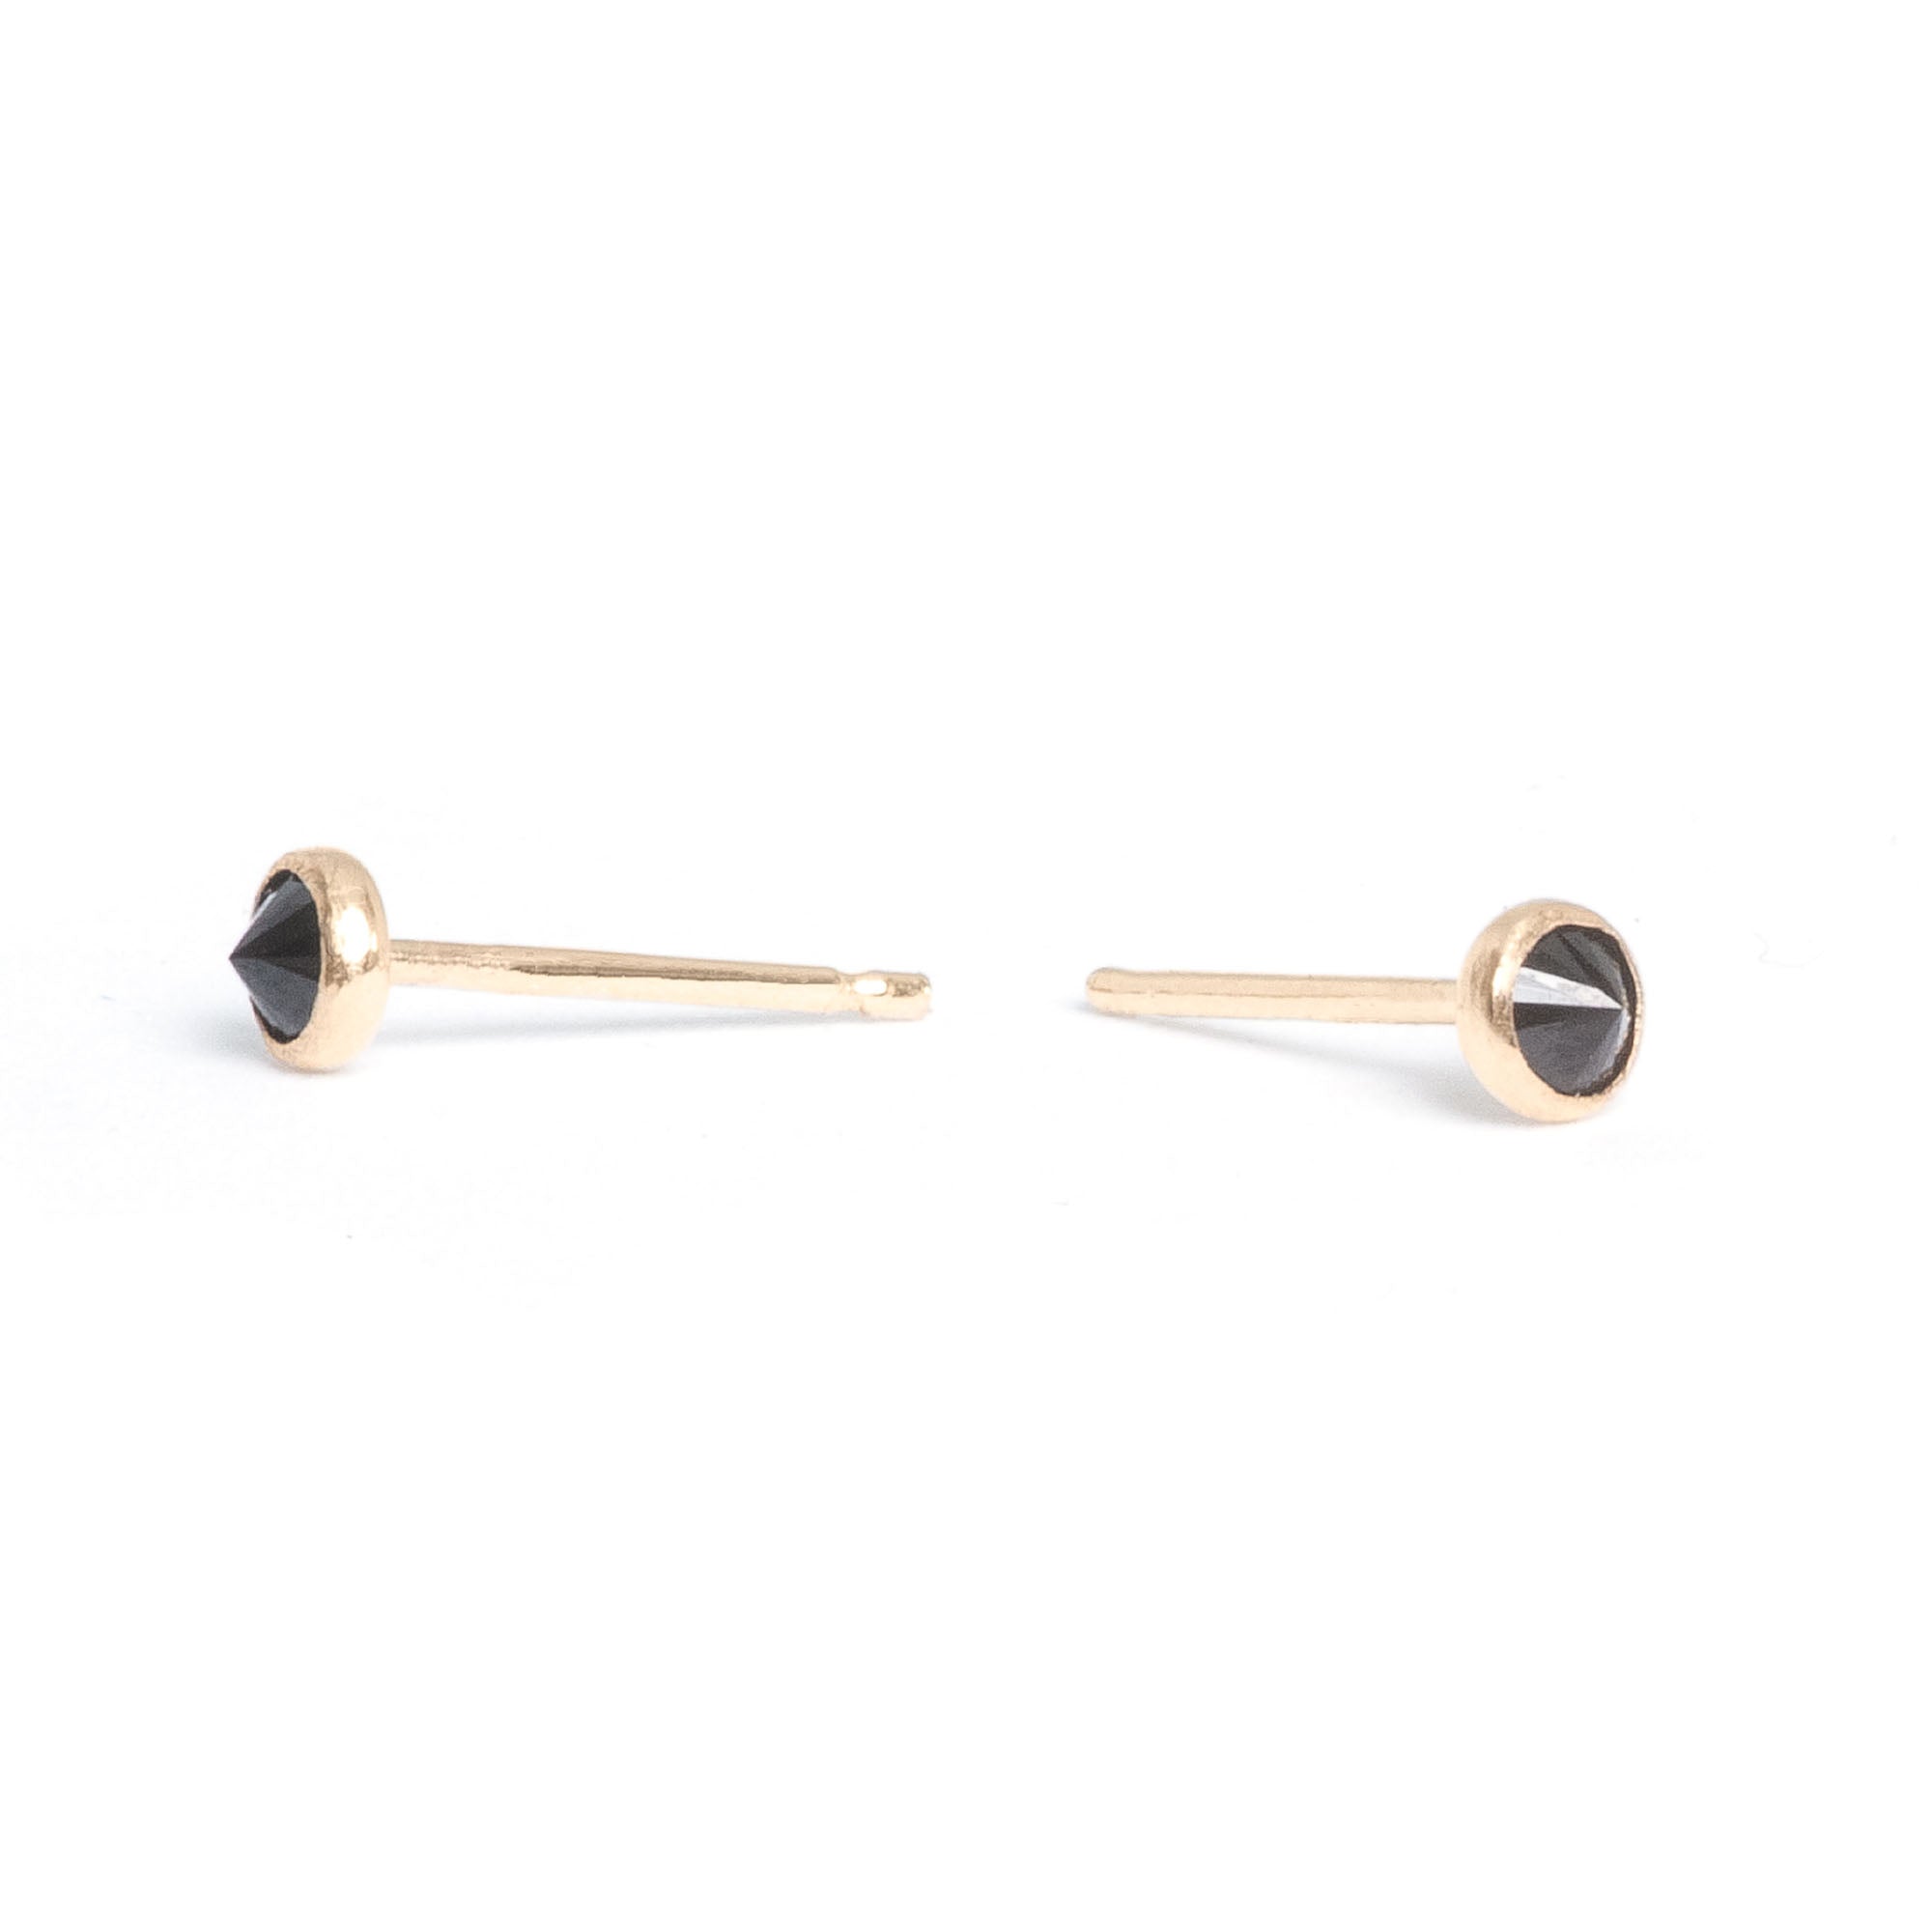 Ultra Tiny Ghost Post Earrings 14K Yellow Gold Fill